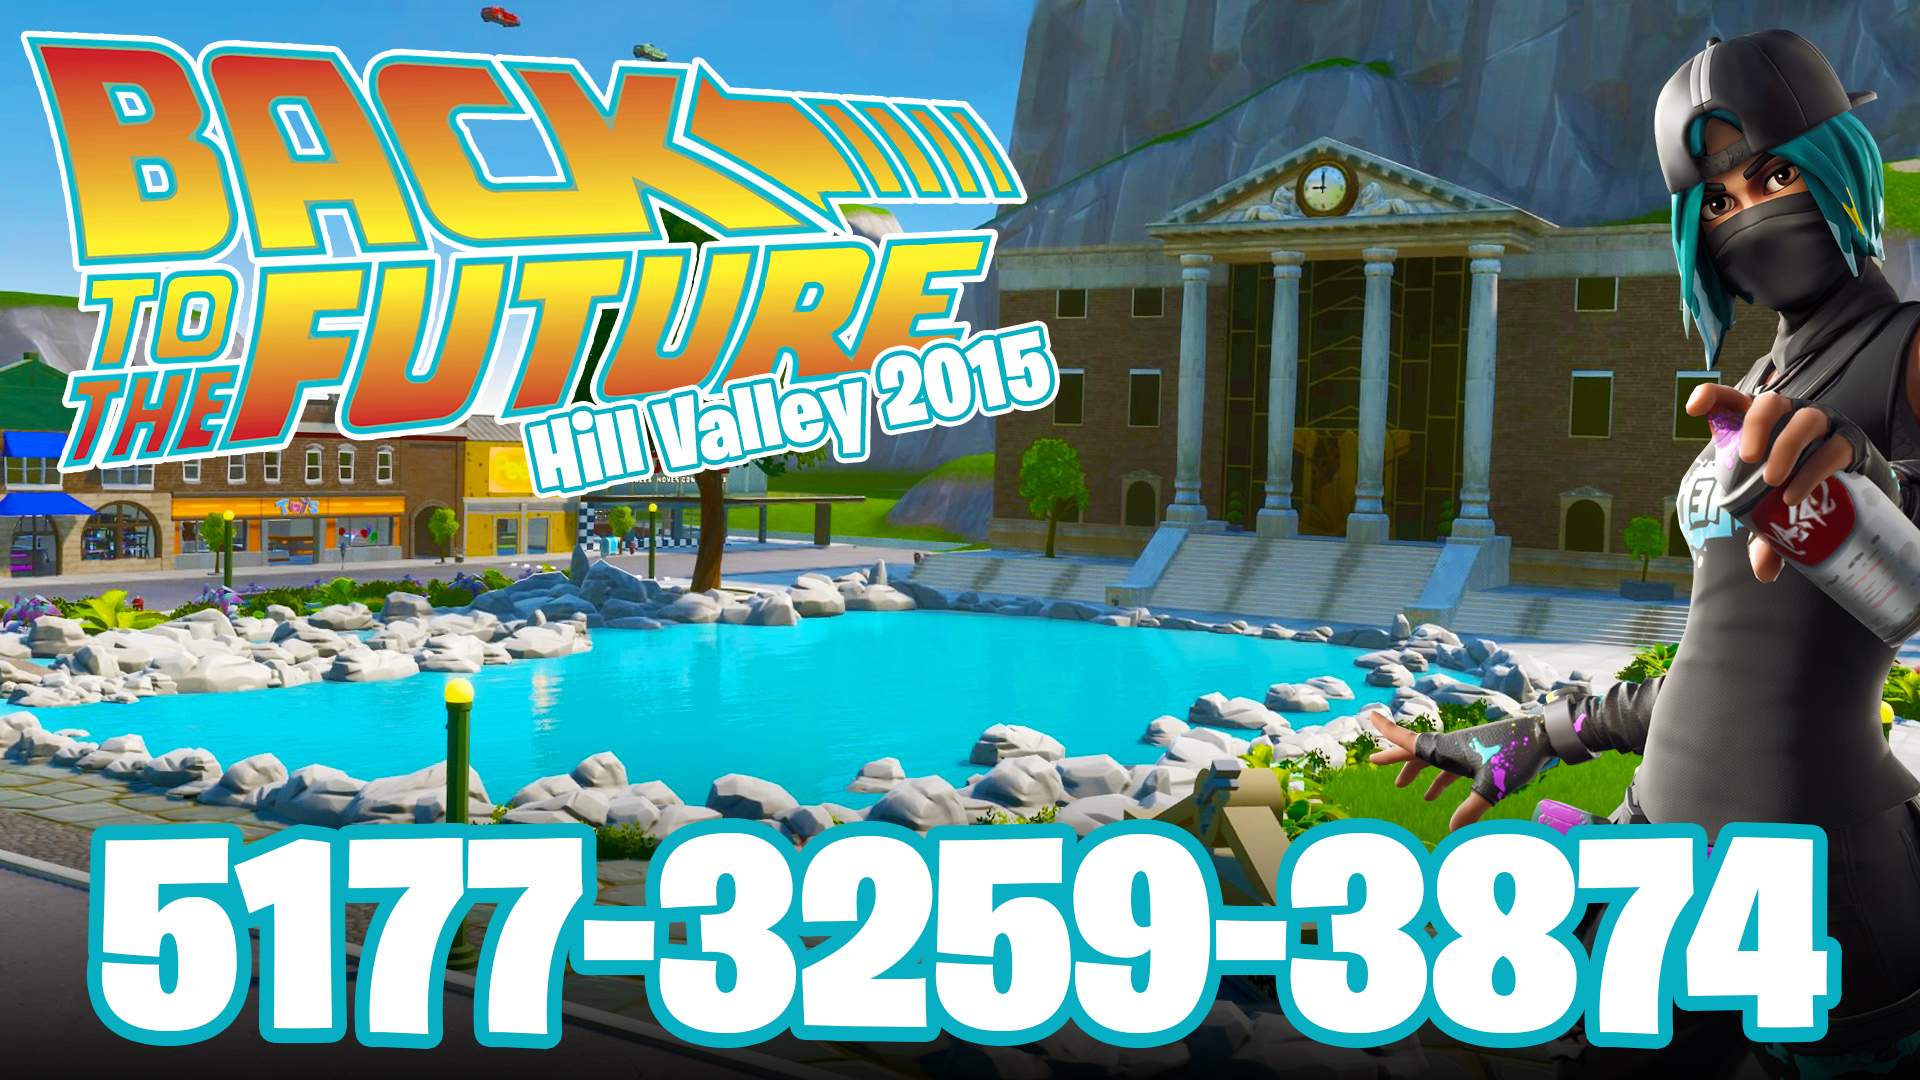 BACK TO THE FUTURE: HILL VALLEY 2015